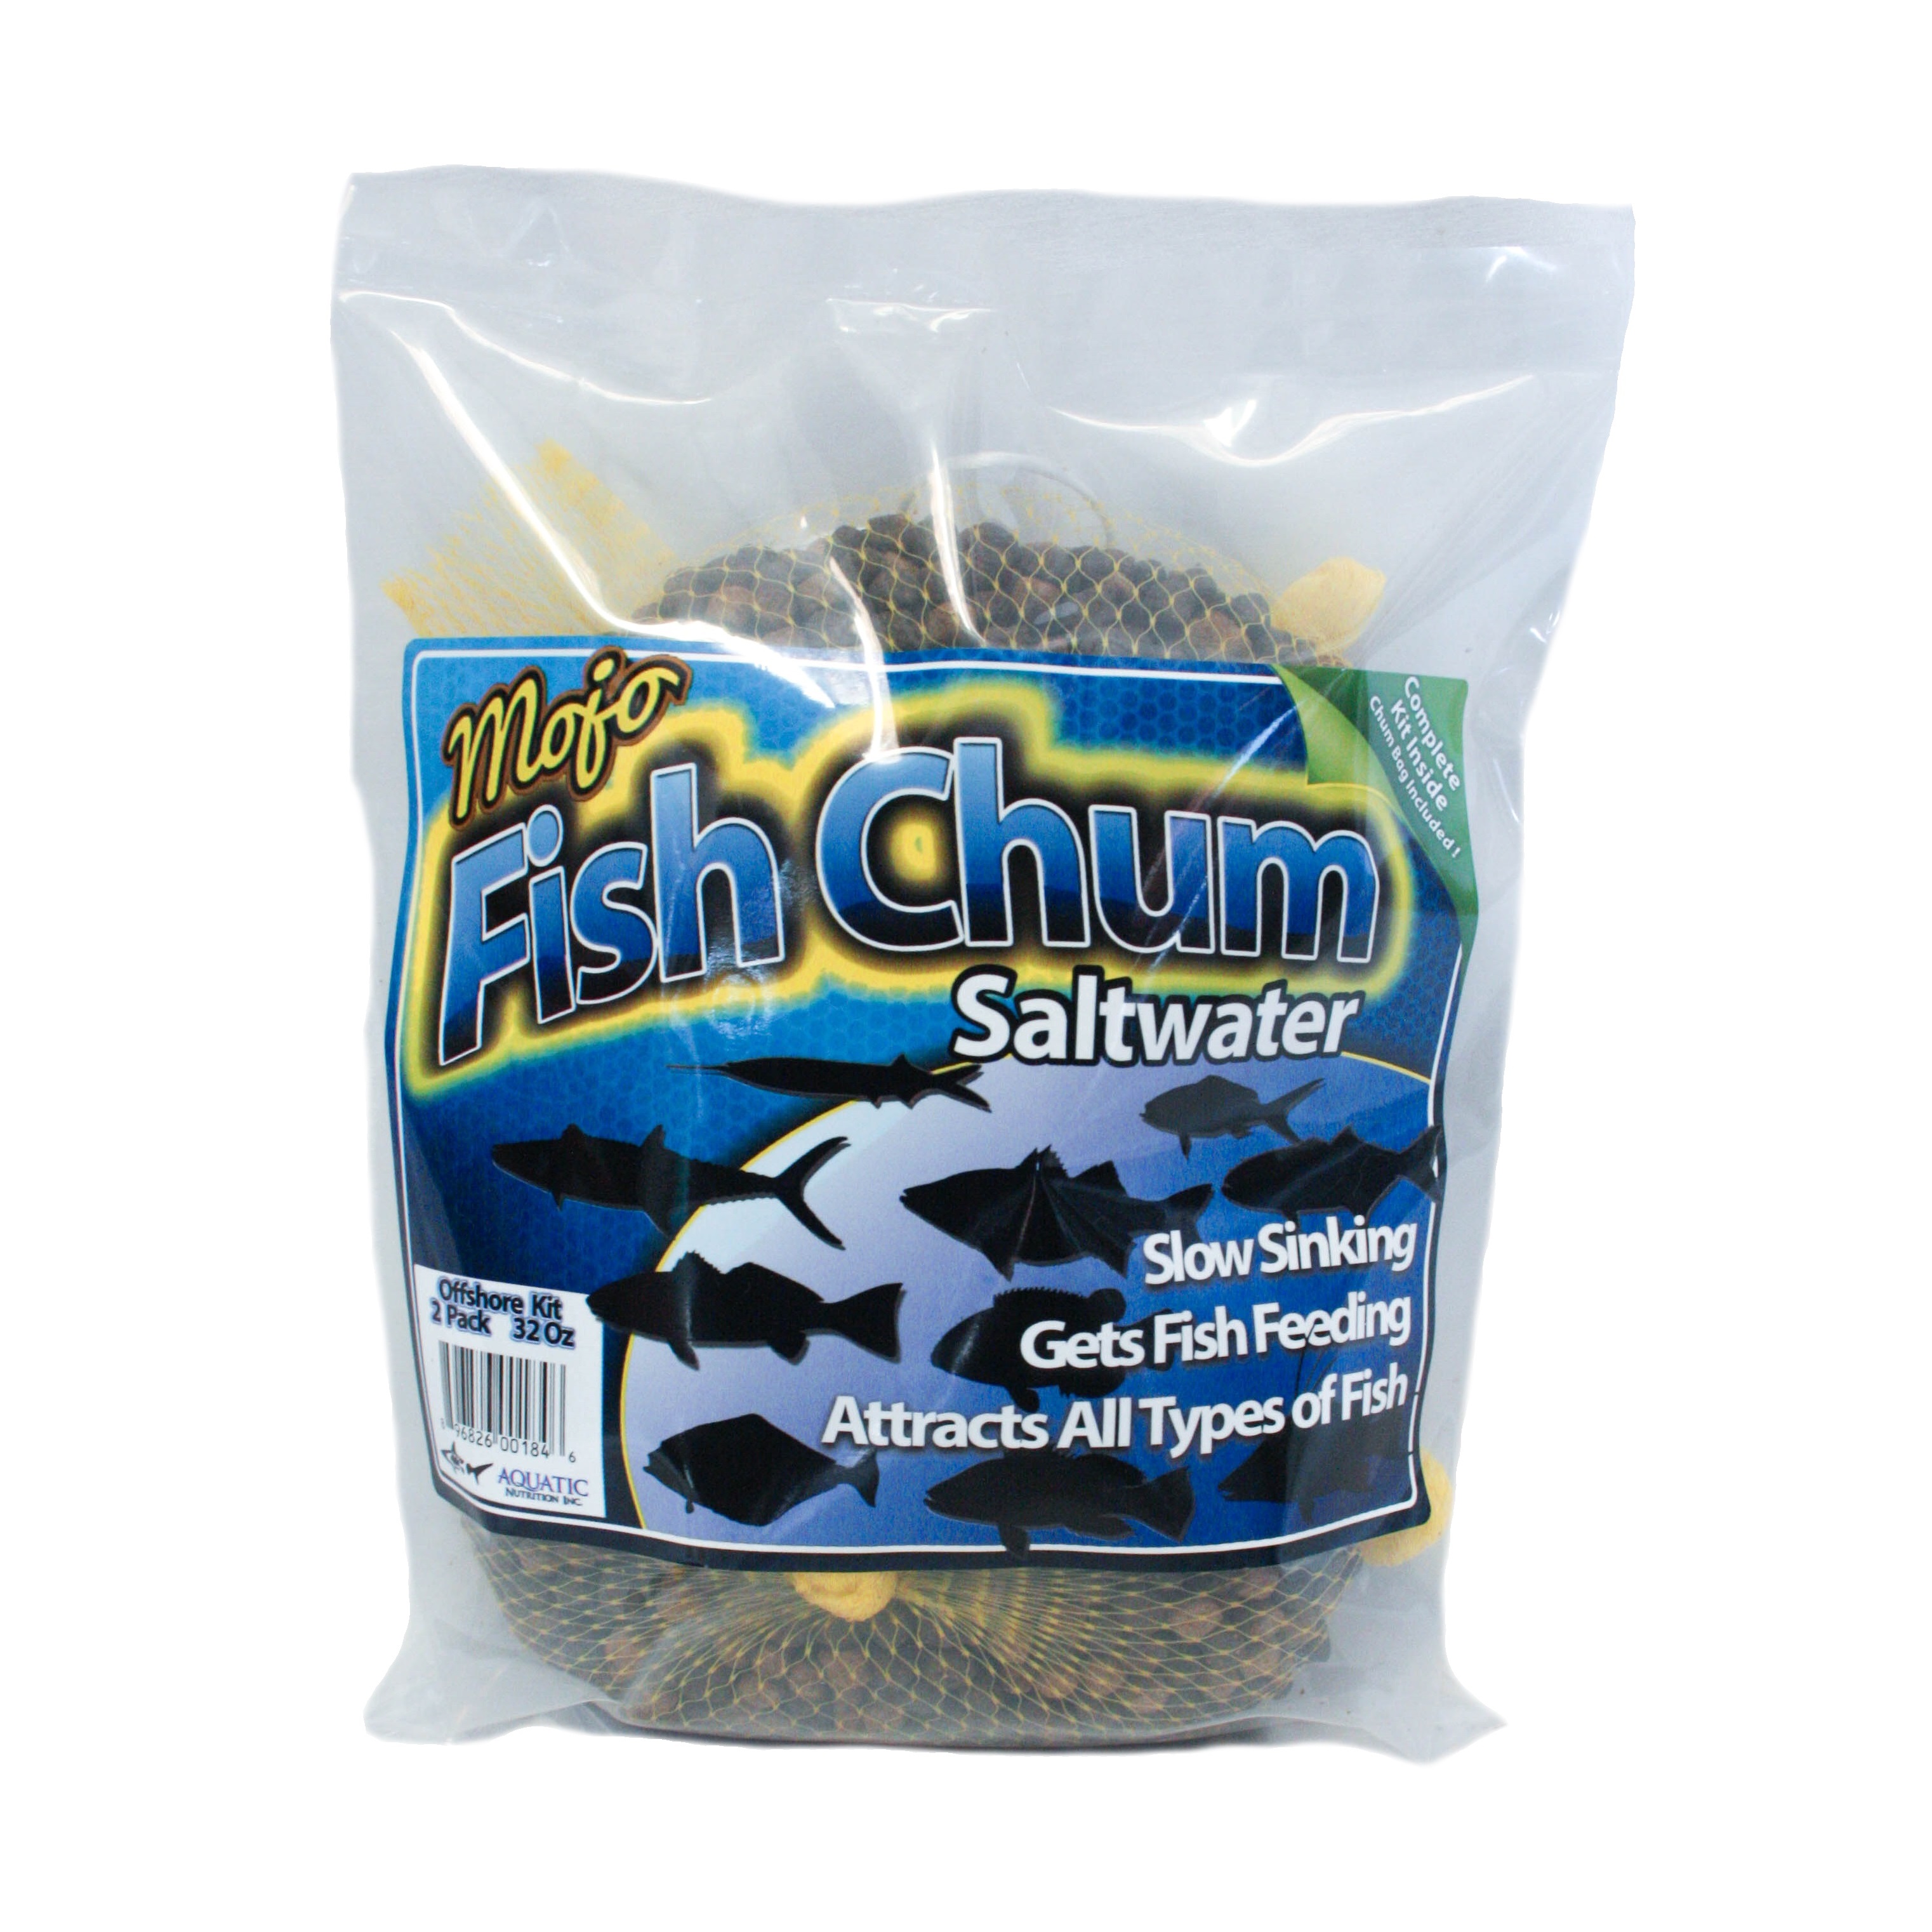 Mojo Fish Chum - Saltwater 2/1lb bags Effective Chum, Low Cost